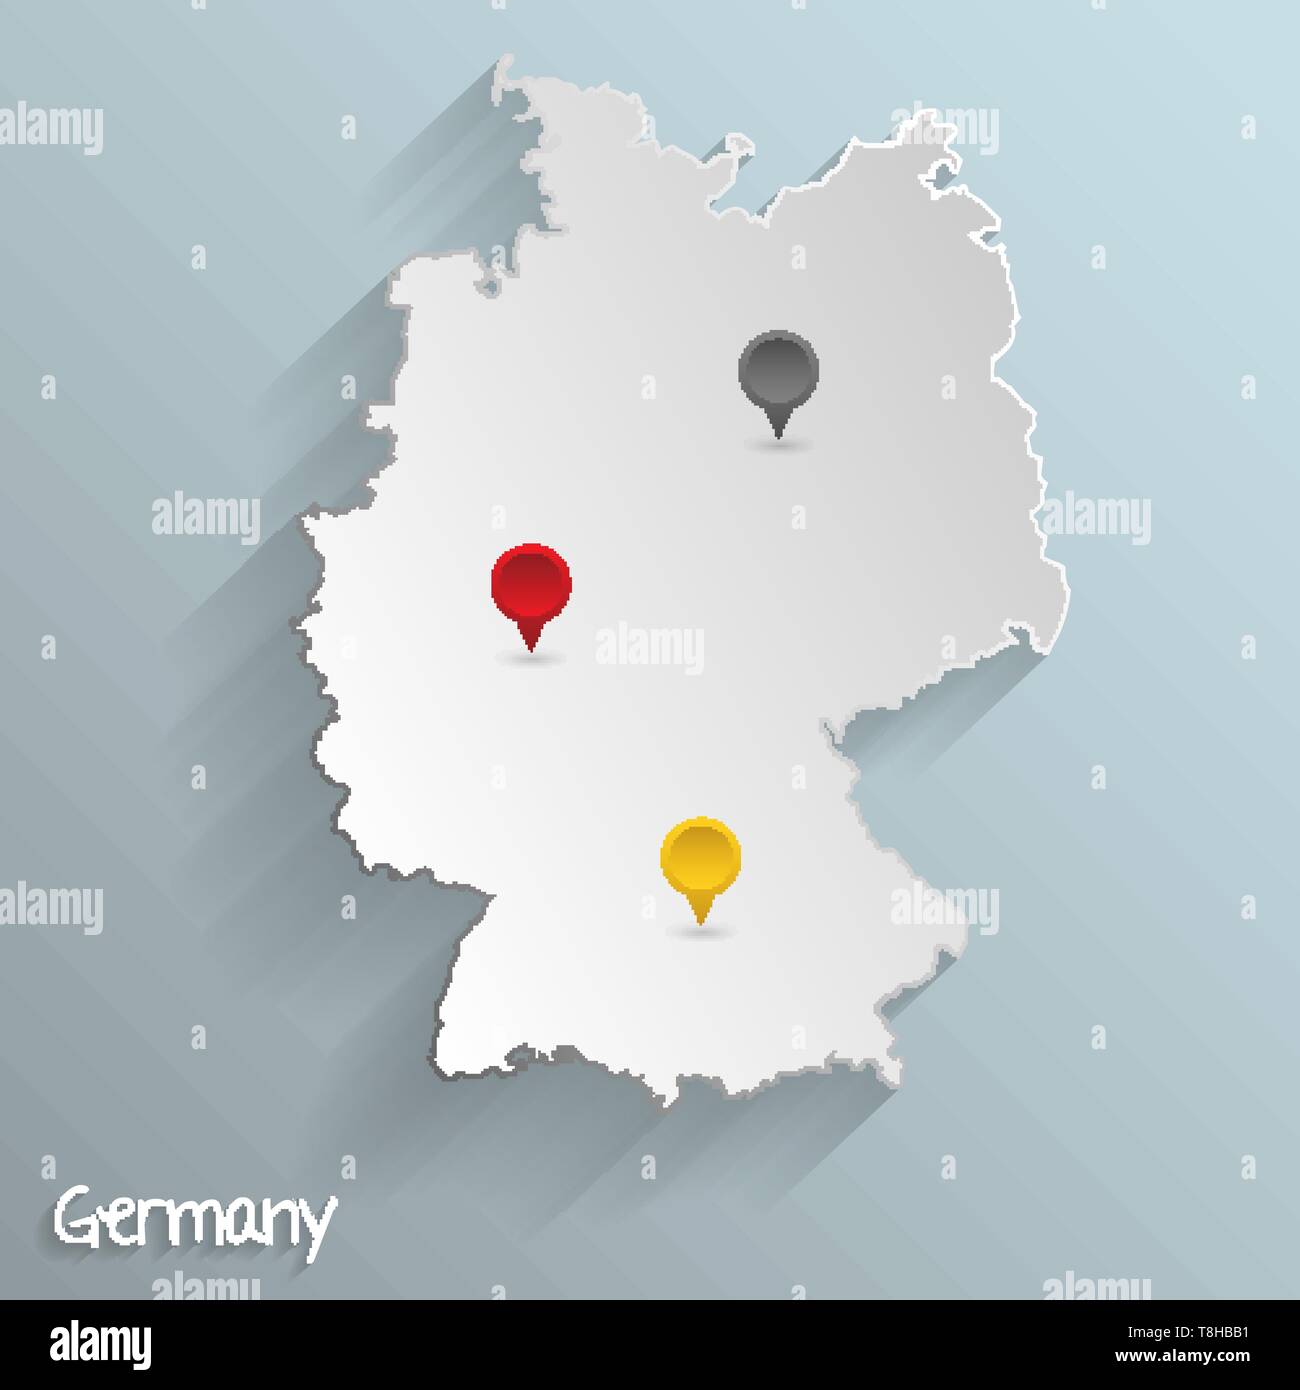 Germany country map 3D vector graphic with marker Stock Vector